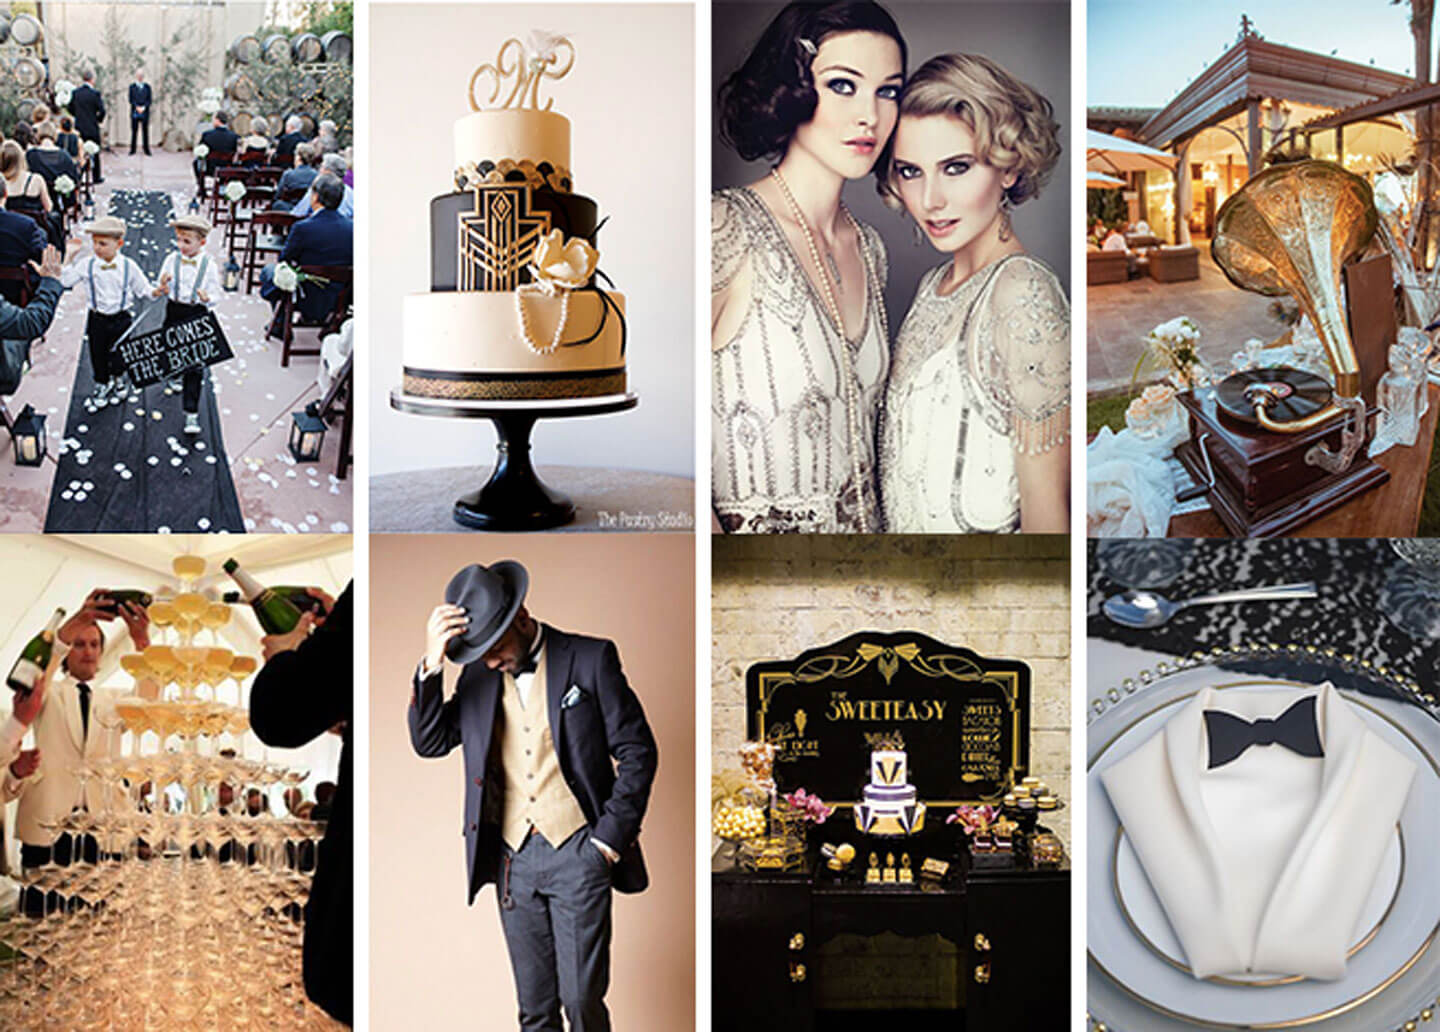 Book-inspired Wedding Themes - Great Gatsby 1920